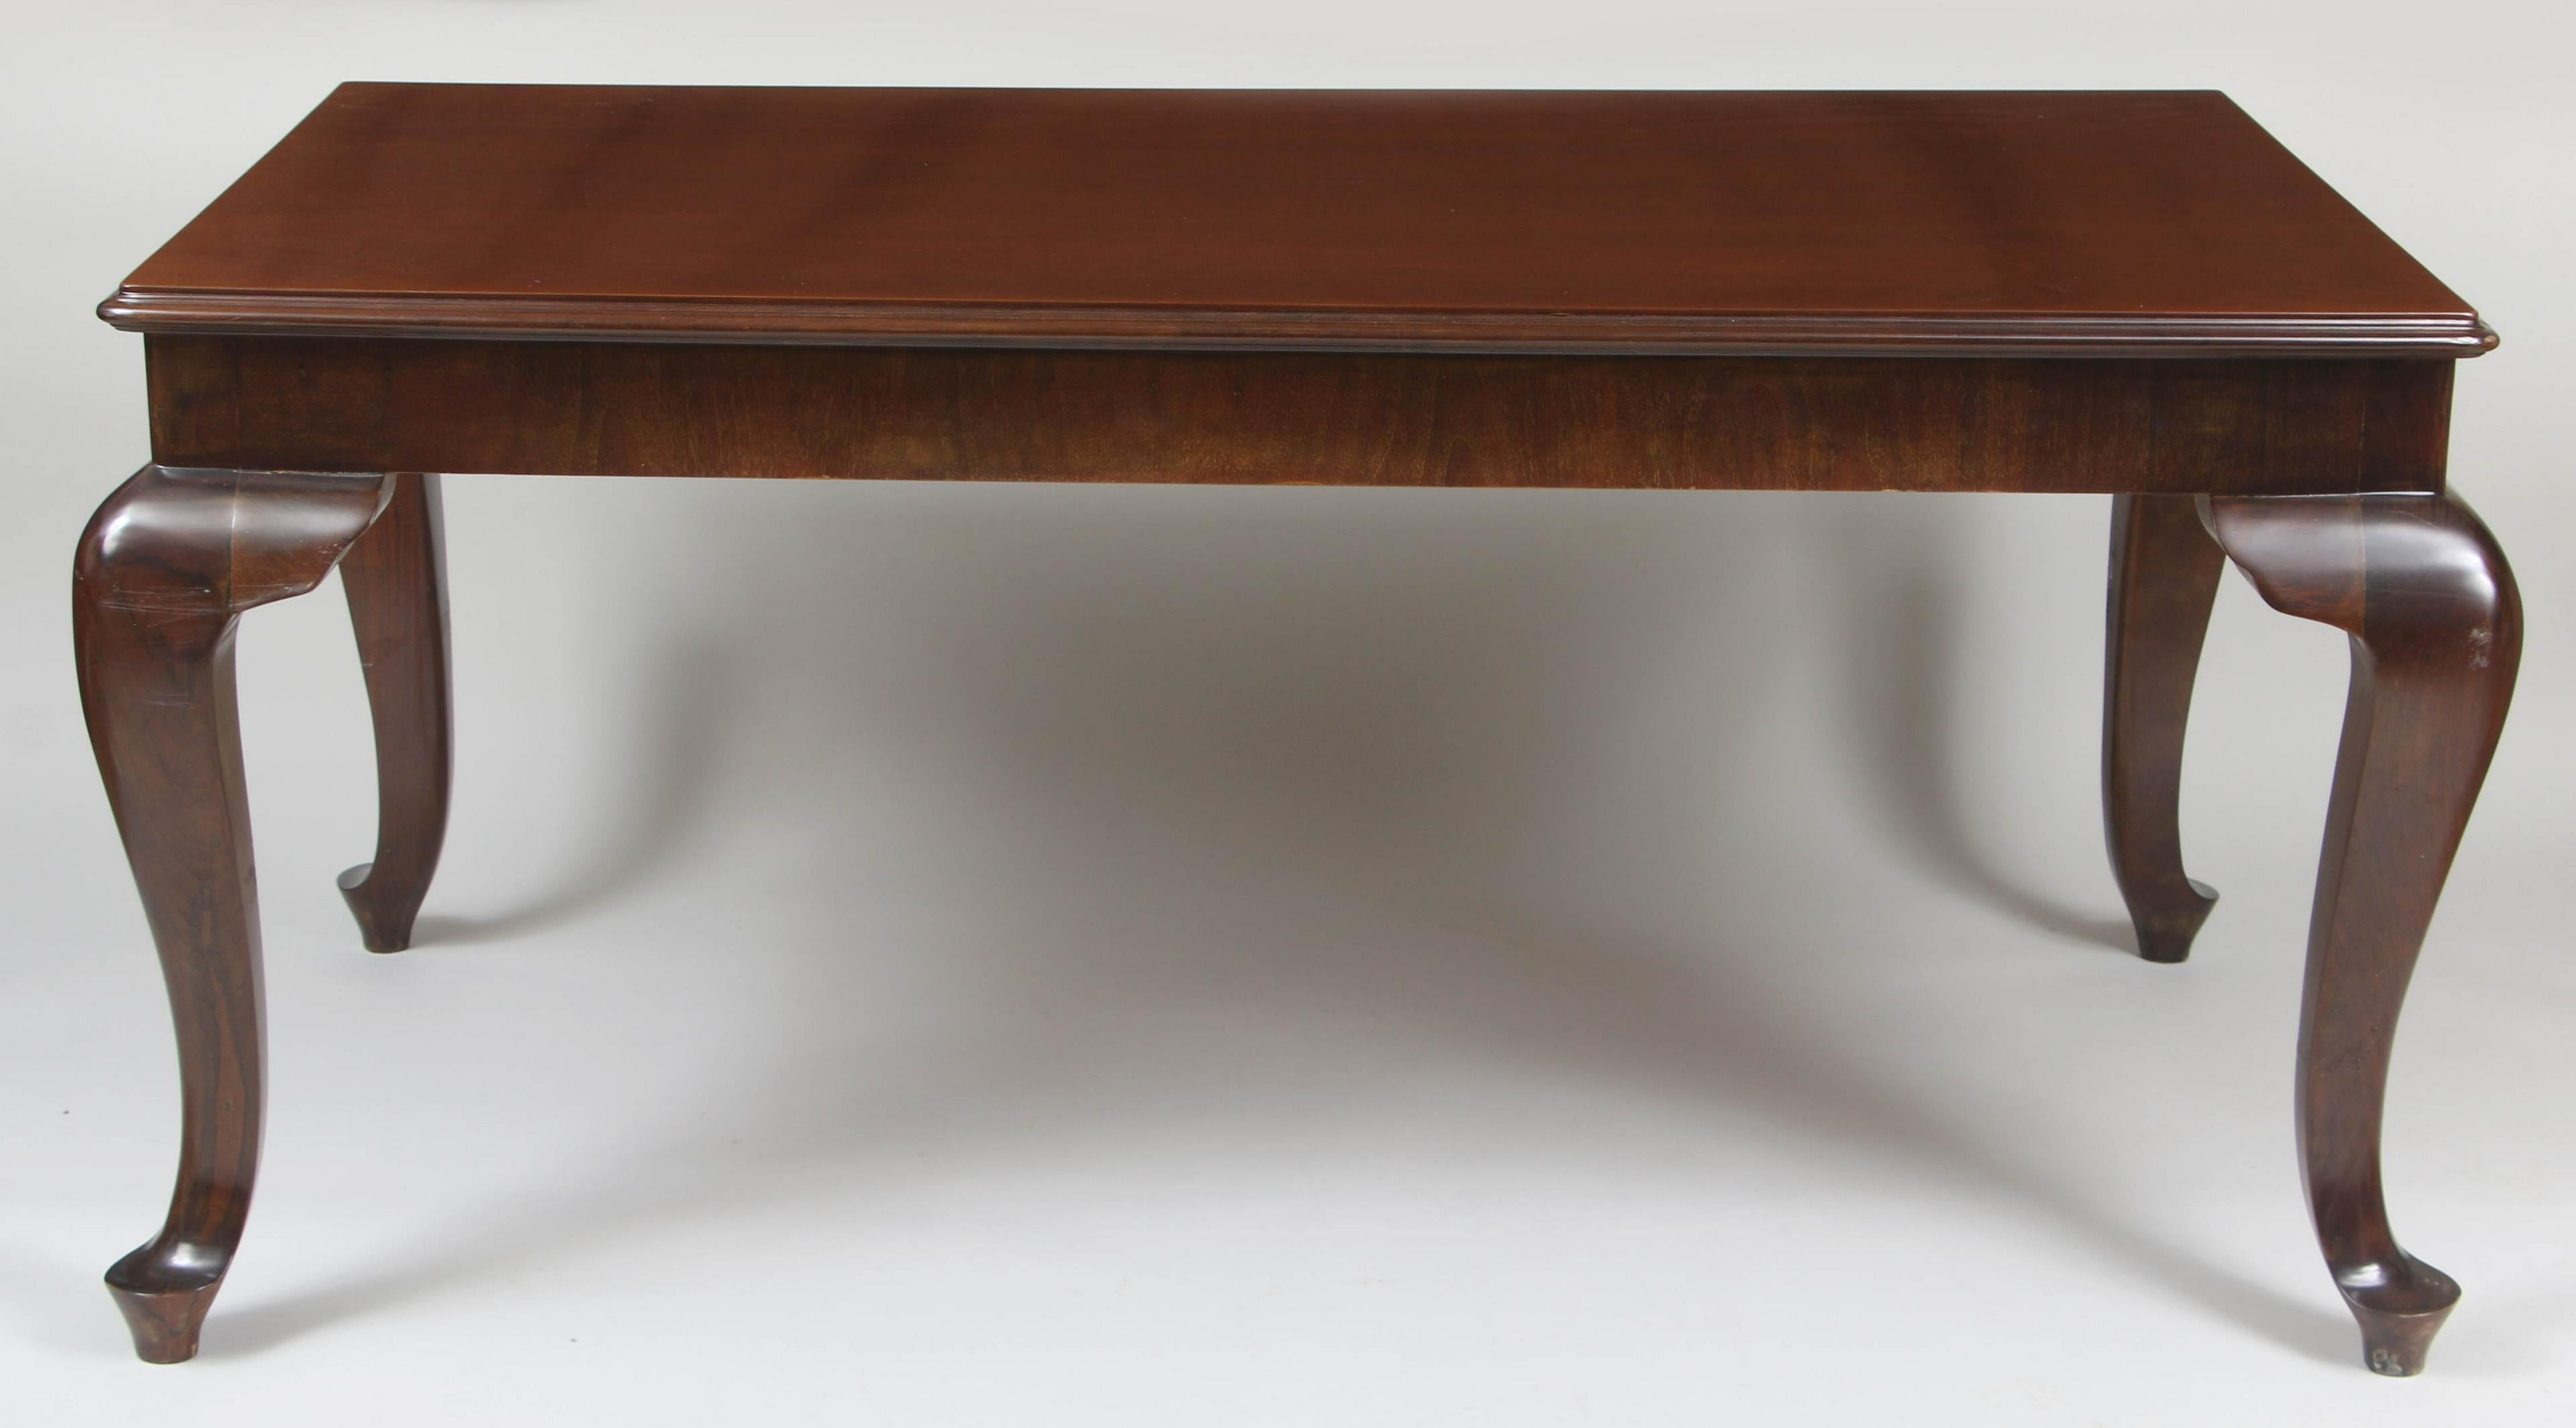 Mahogany dining table with cabriole legs with pullout / pull-out drawer.